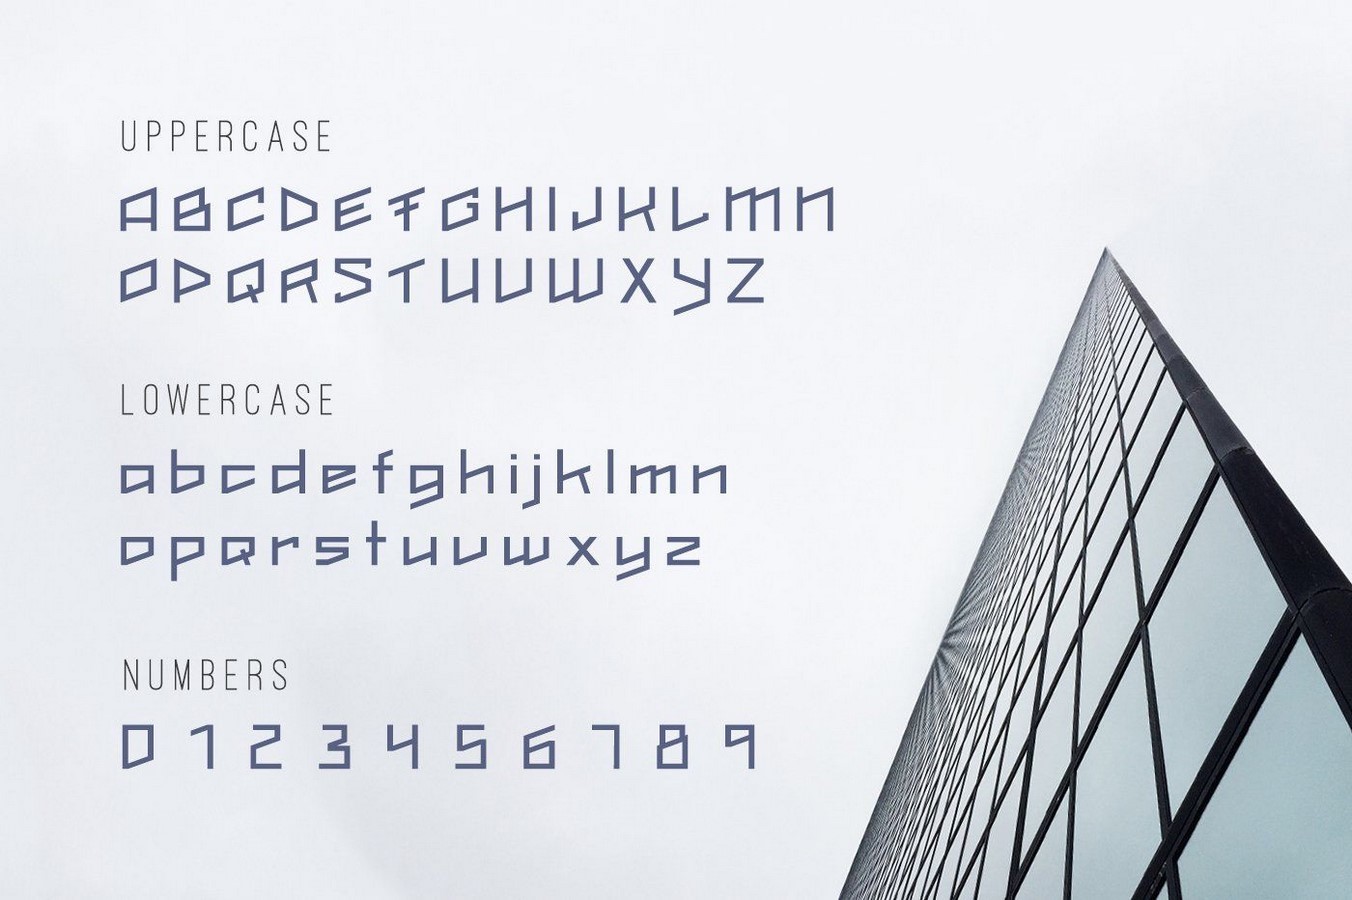 Architectural Drafting Font